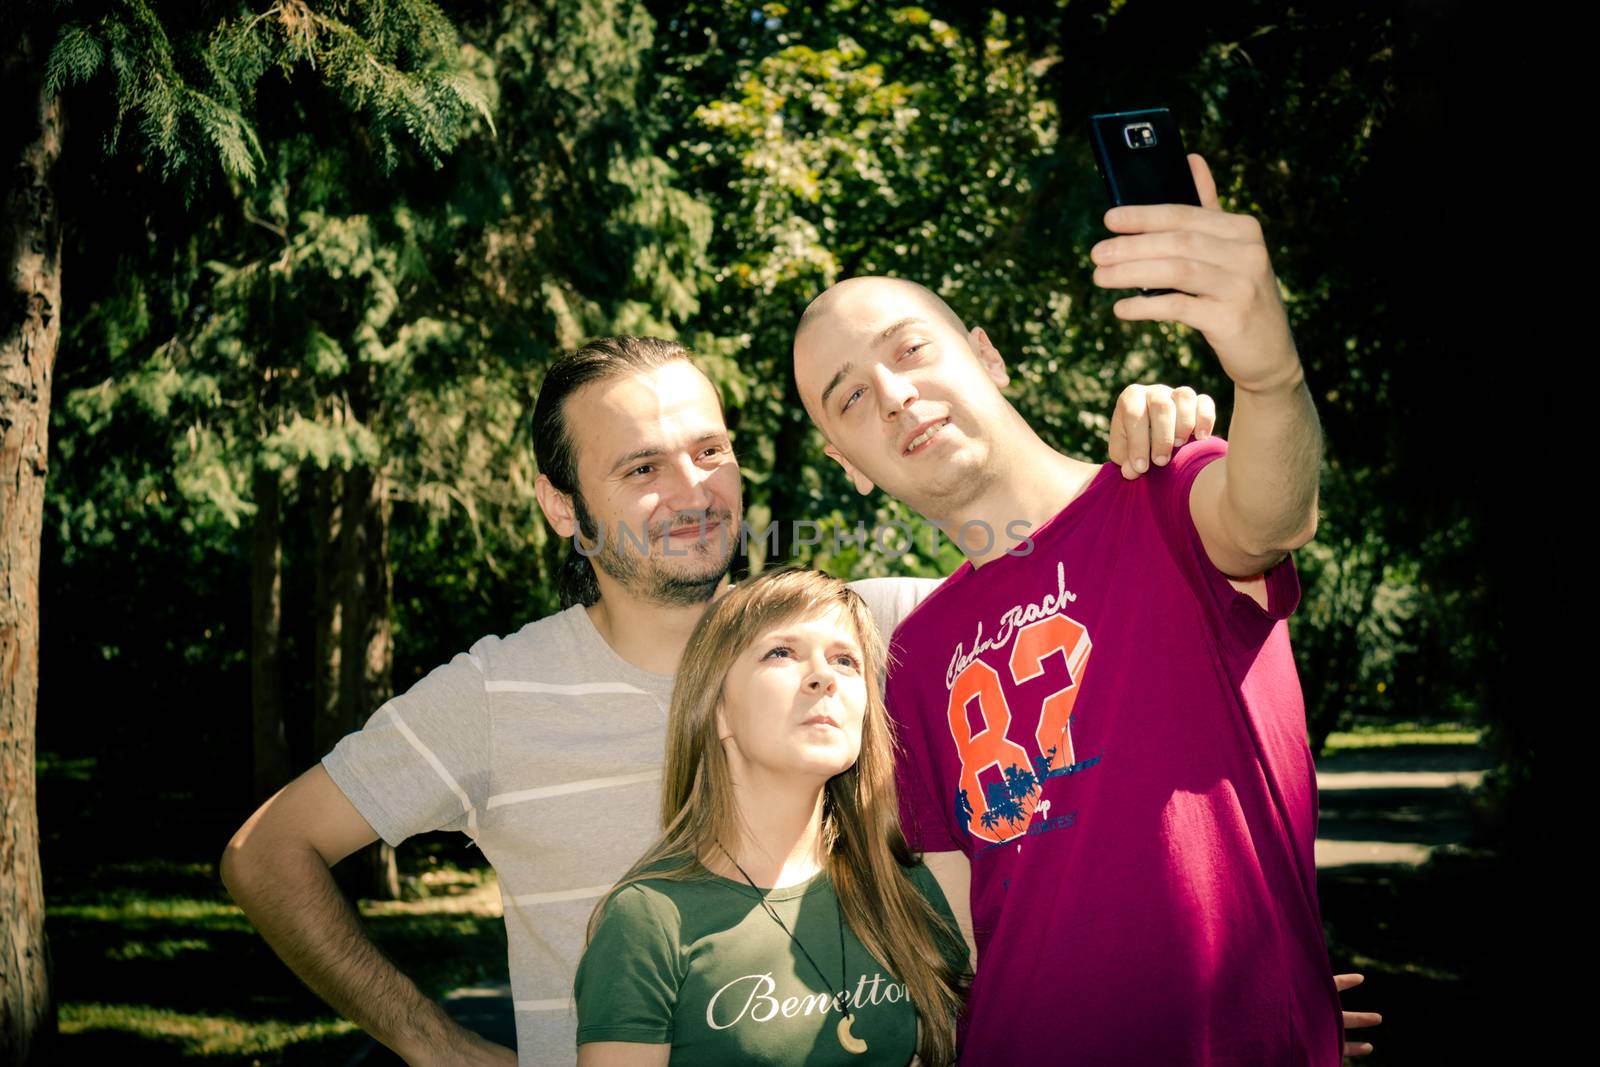 Friends group taking a selfie in the park